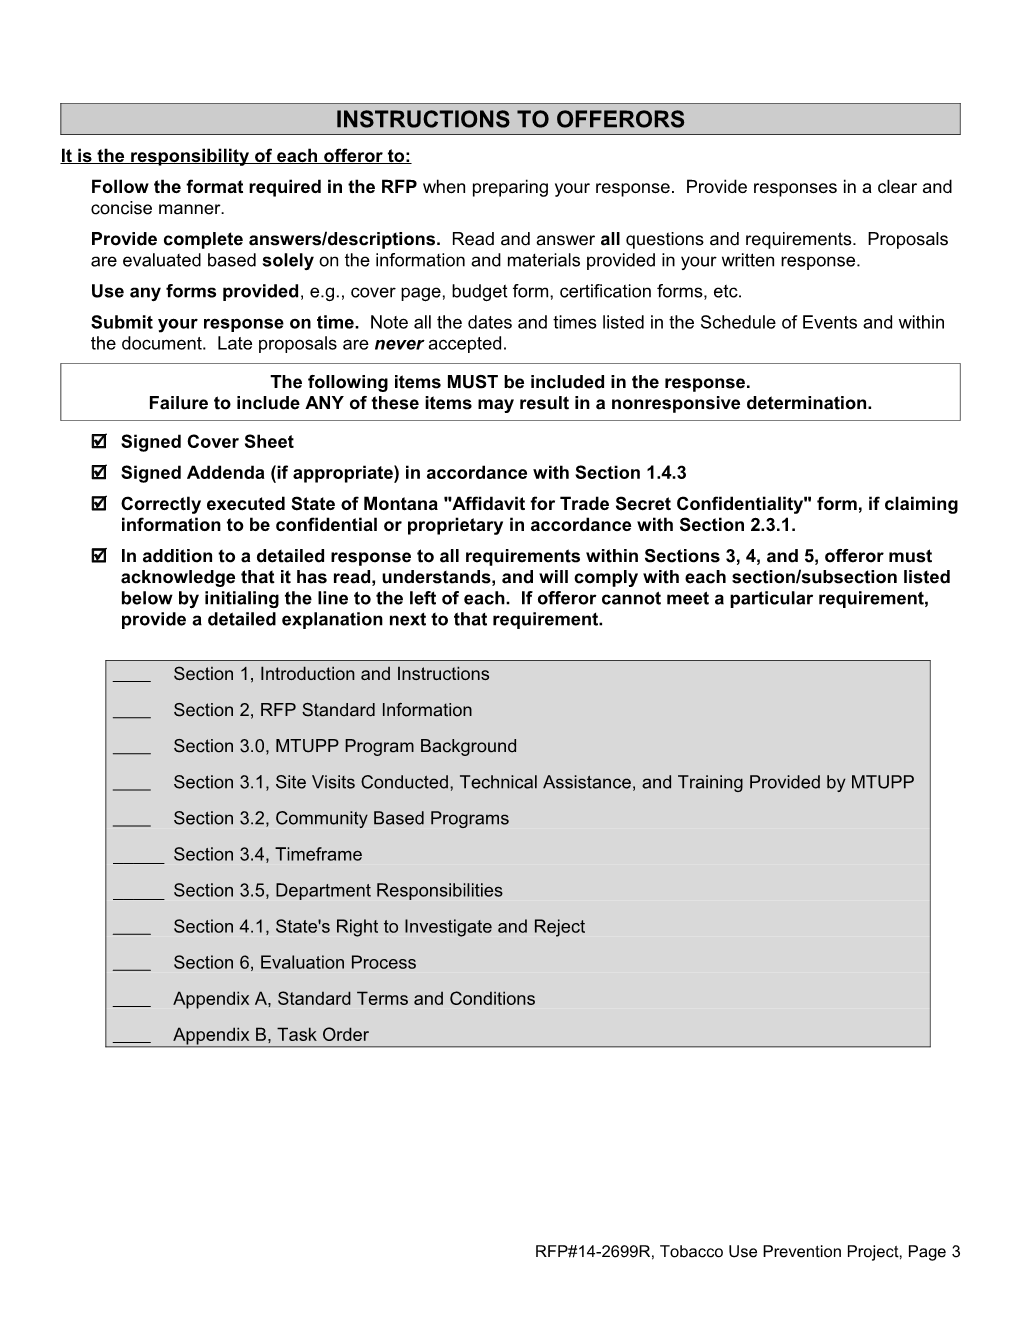 RFP#14-2699R, Tobacco Use Prevention Project, Page 1